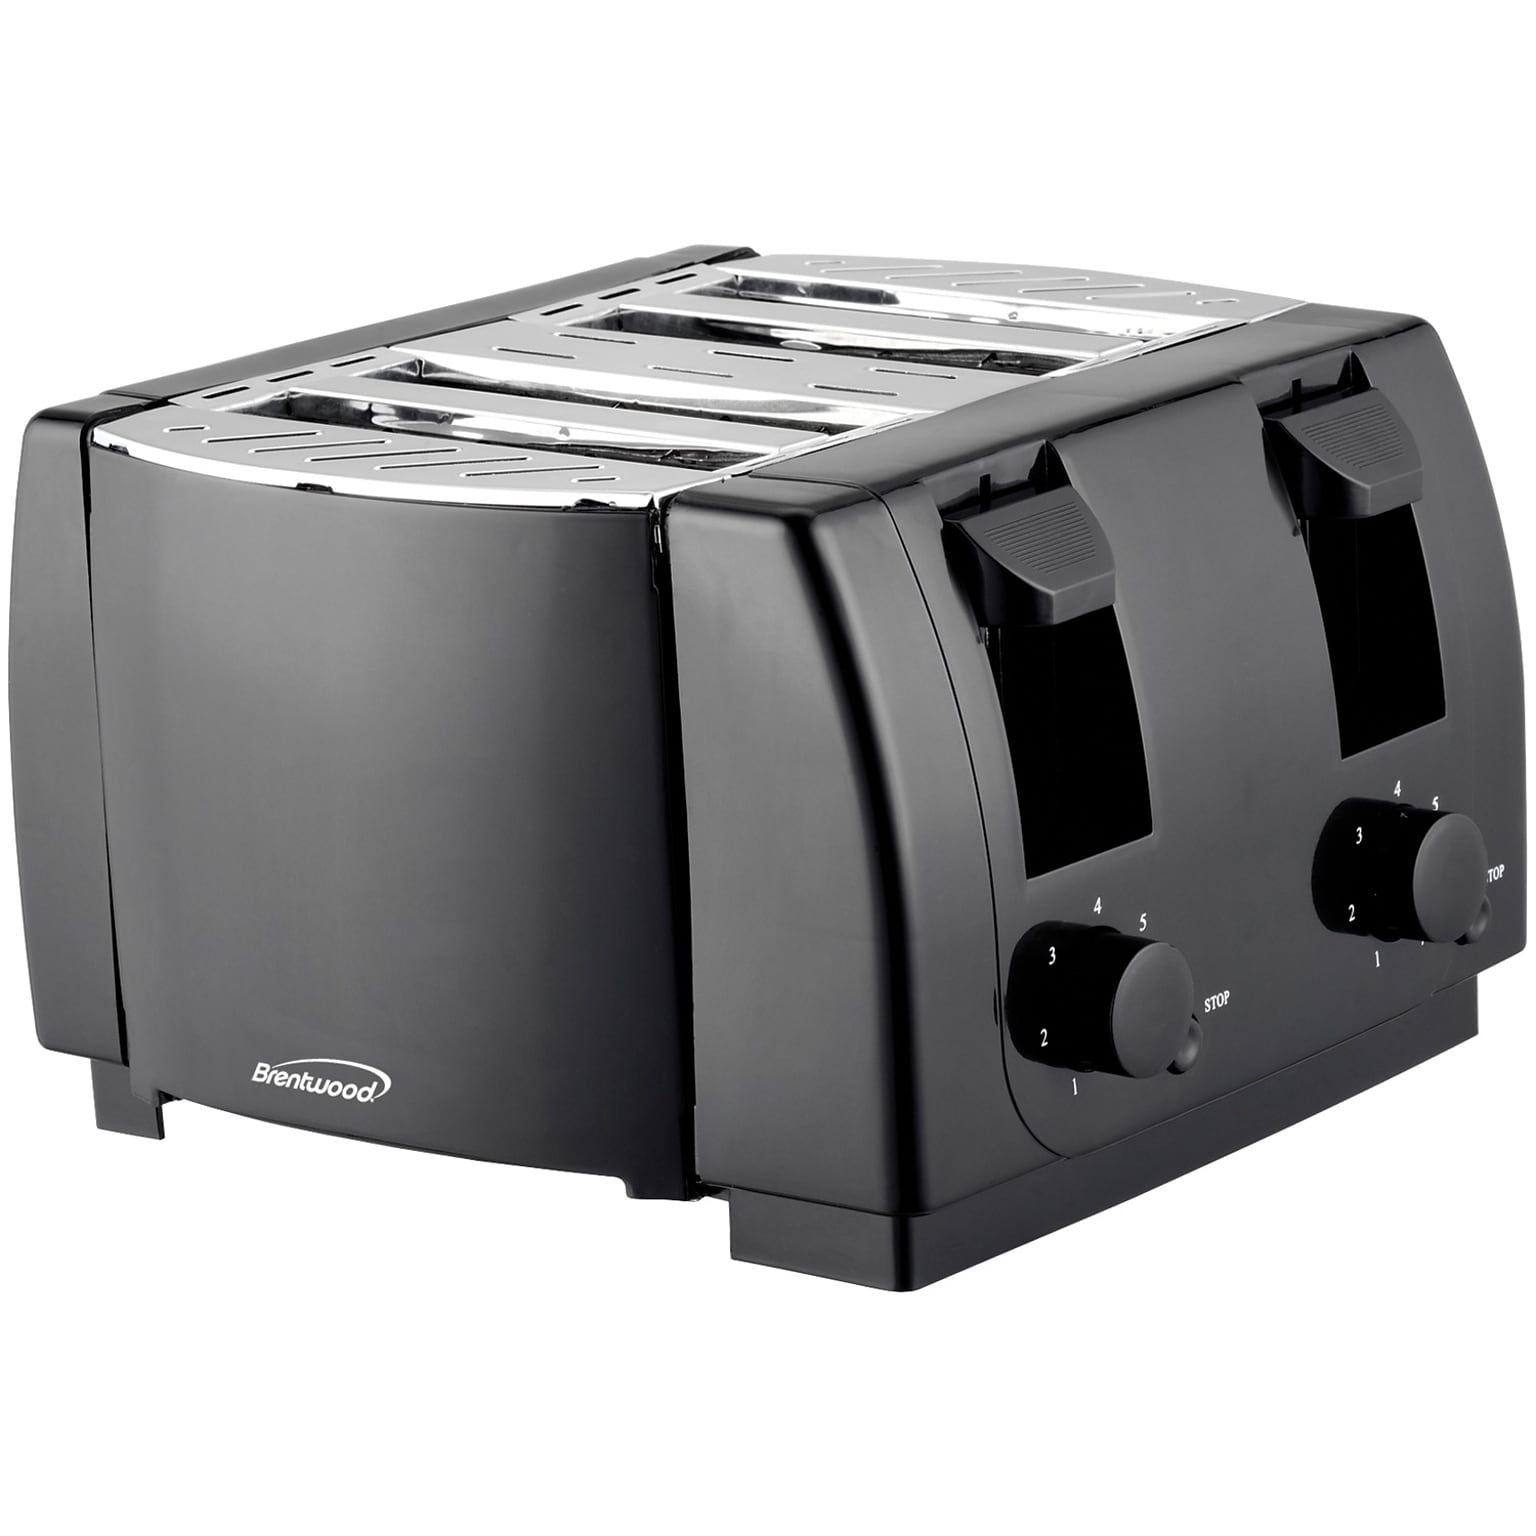 Brentwood Appliances Cool Touch 4-Slice Toaster, Black (TS-285)